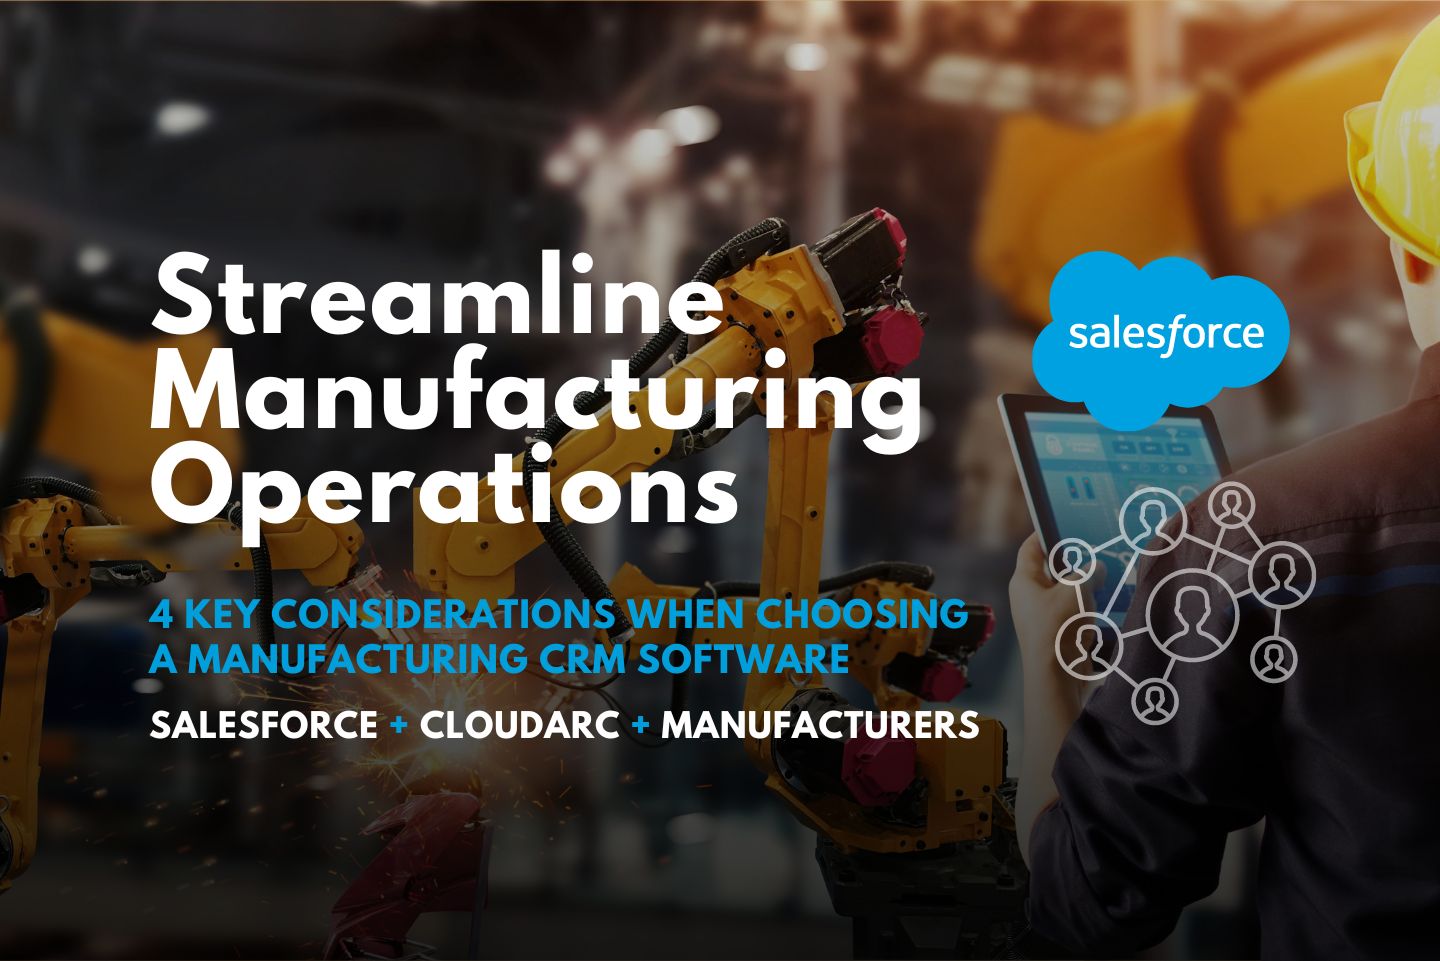 Manufacturing CRM Software Best CRM For Manufacturing Cloud Arc Salesforce